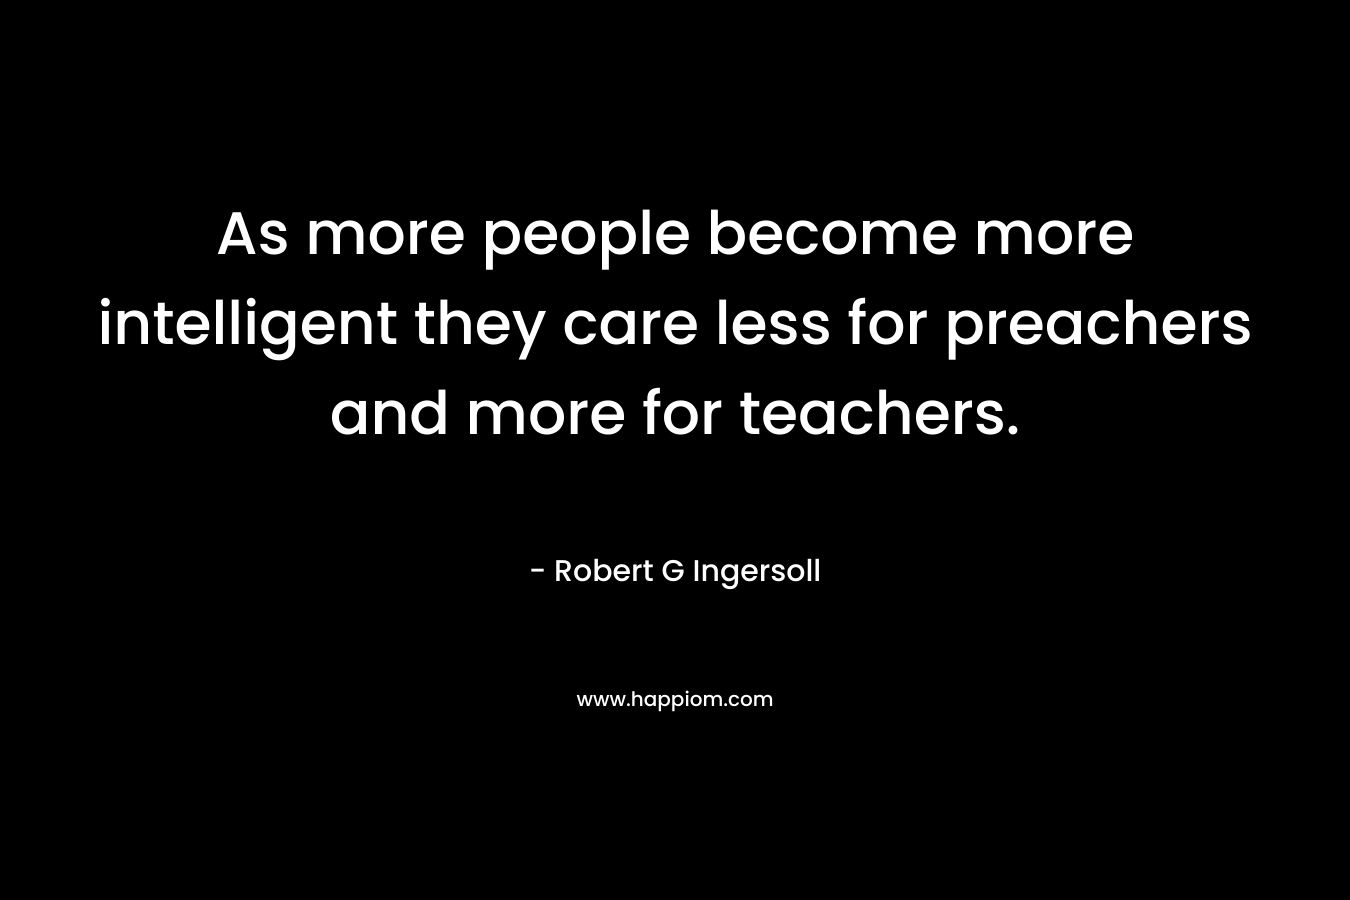 As more people become more intelligent they care less for preachers and more for teachers. – Robert G Ingersoll